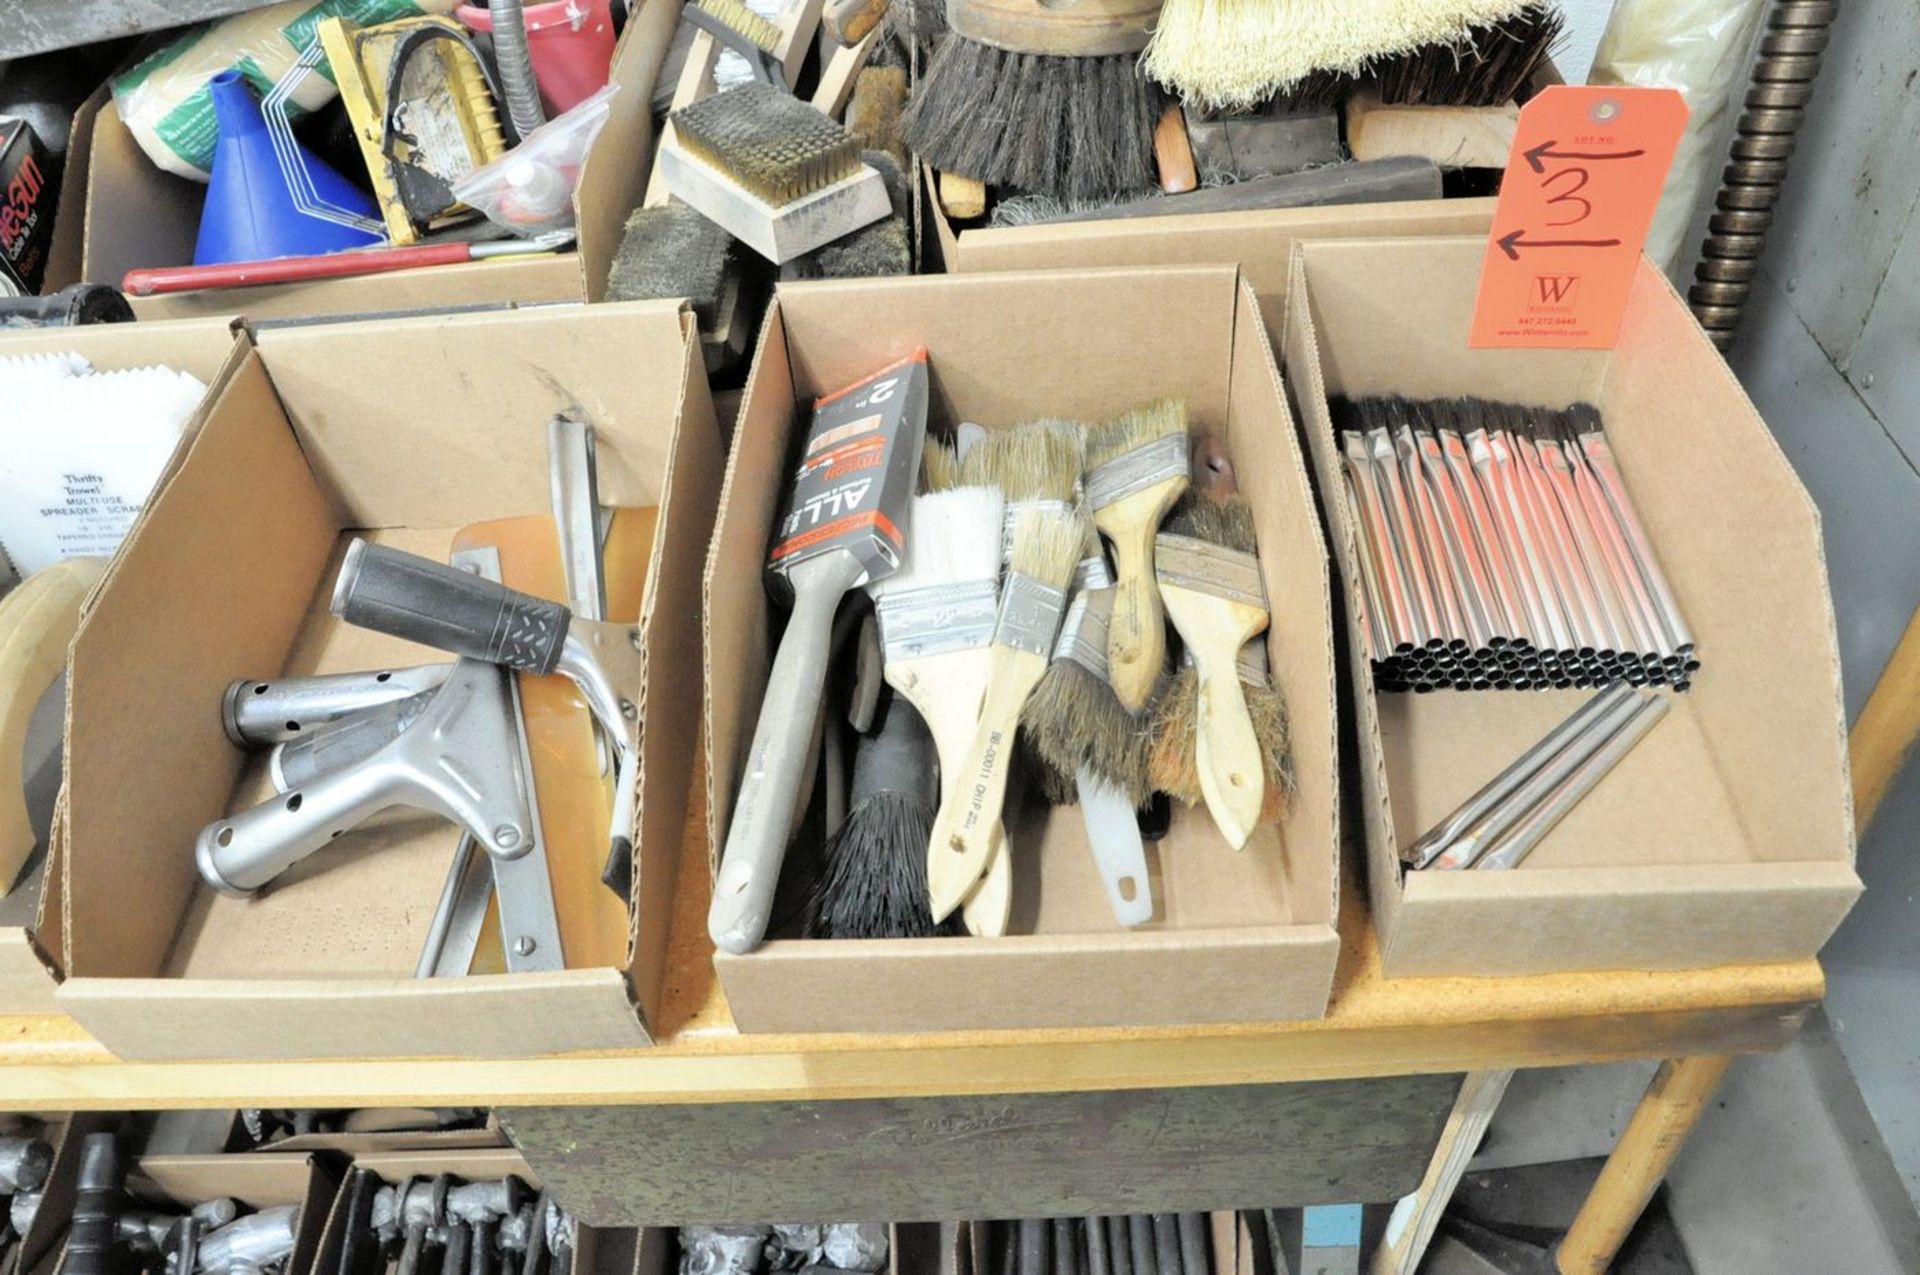 Lot - Brushes, Paint Tray, Paint Sprayer, Wire Strippers, Tape Measures, Utility Knives, - Image 10 of 10